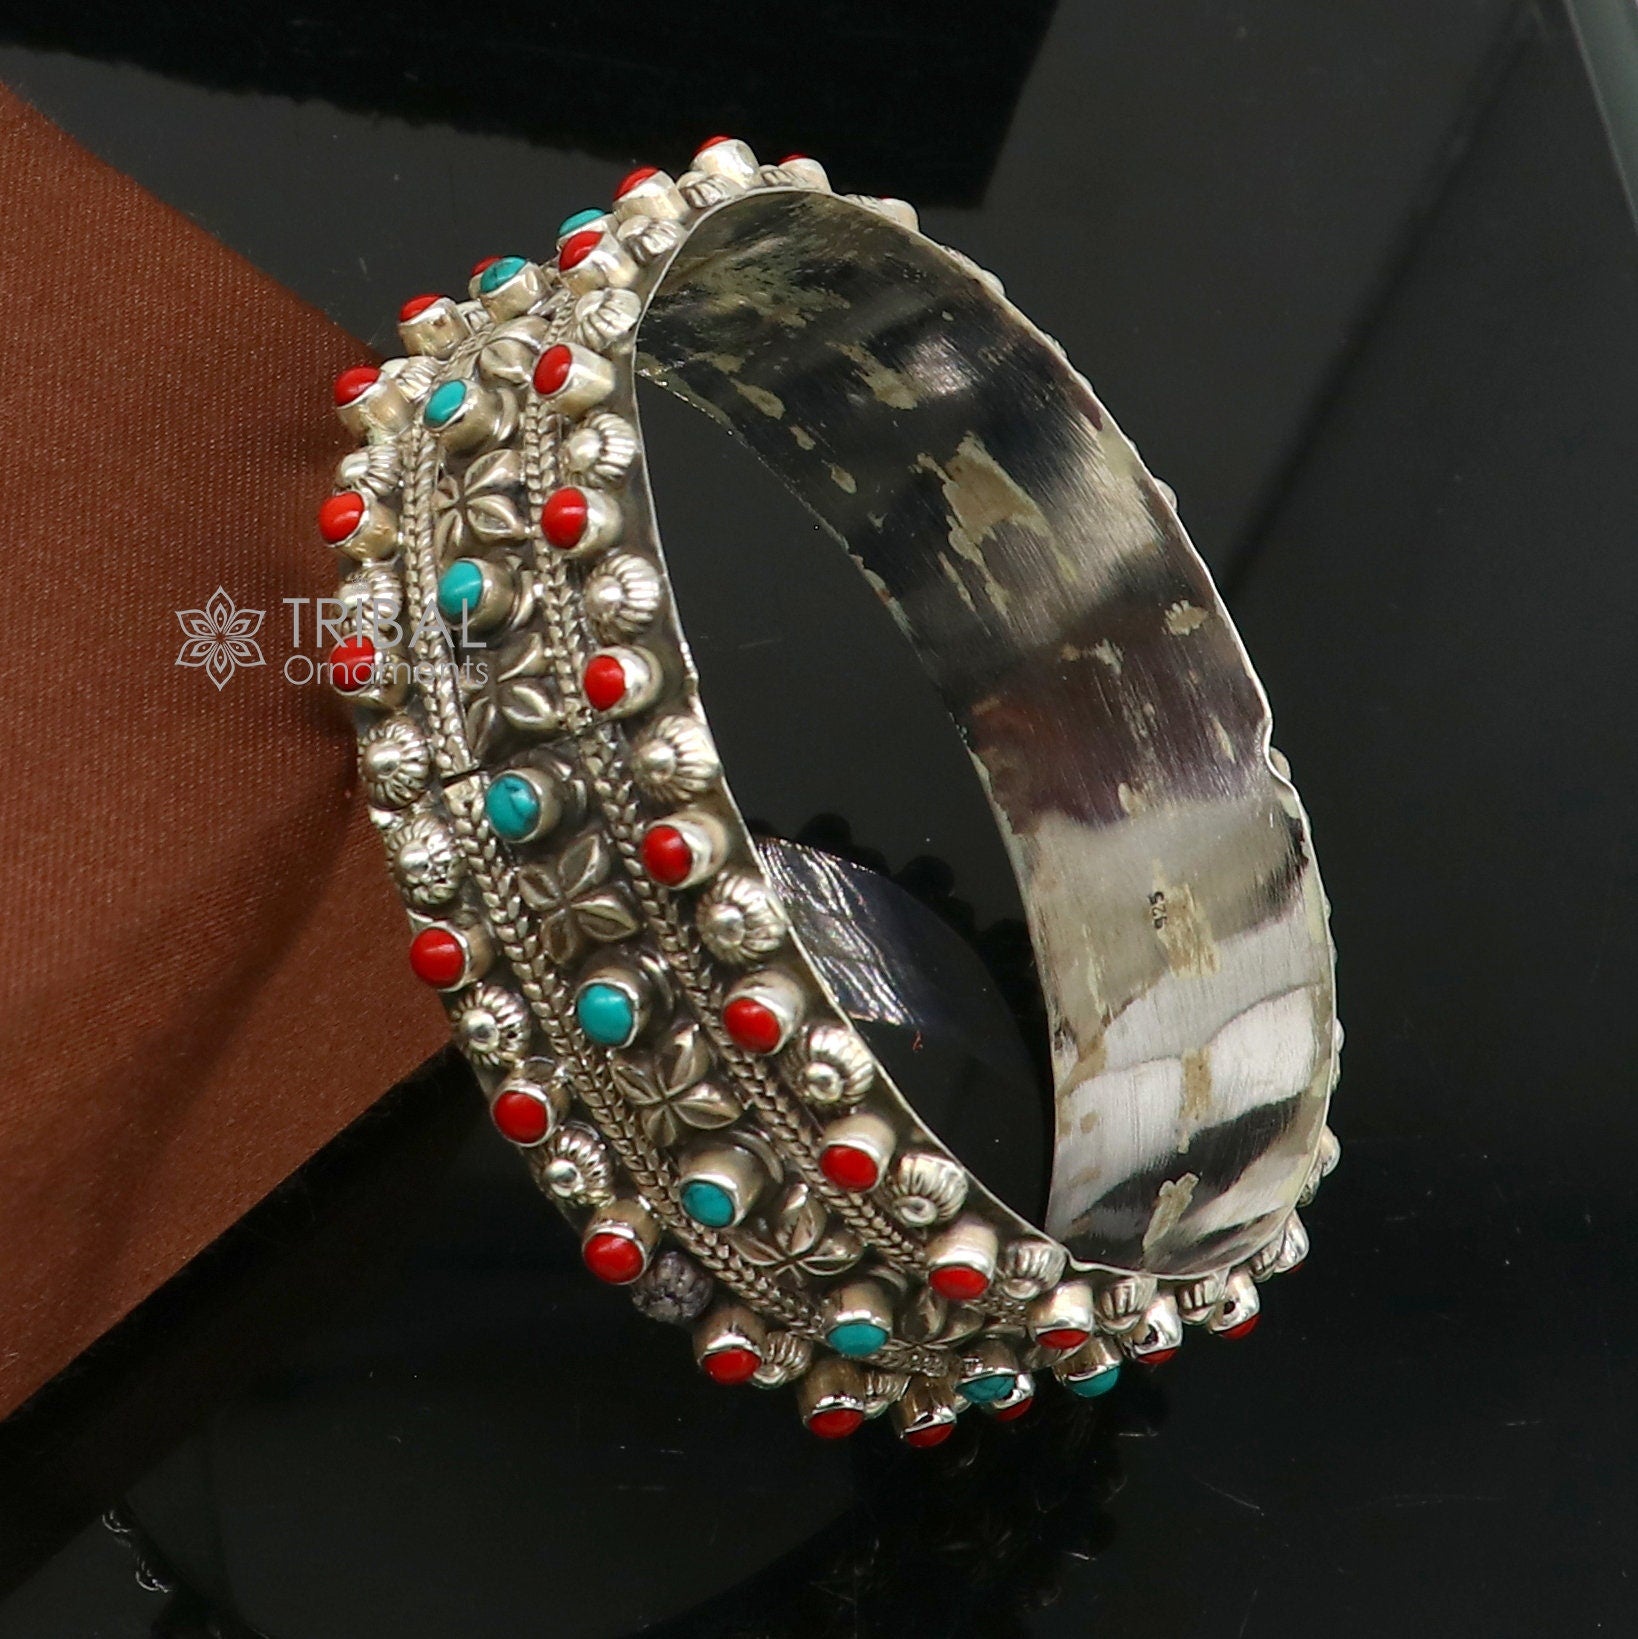 Exclusive Red coral & turquoise stone 925 sterling silver design wedding anniversary gifting bangle bracelet kada functional jewelry nba390 - TRIBAL ORNAMENTS